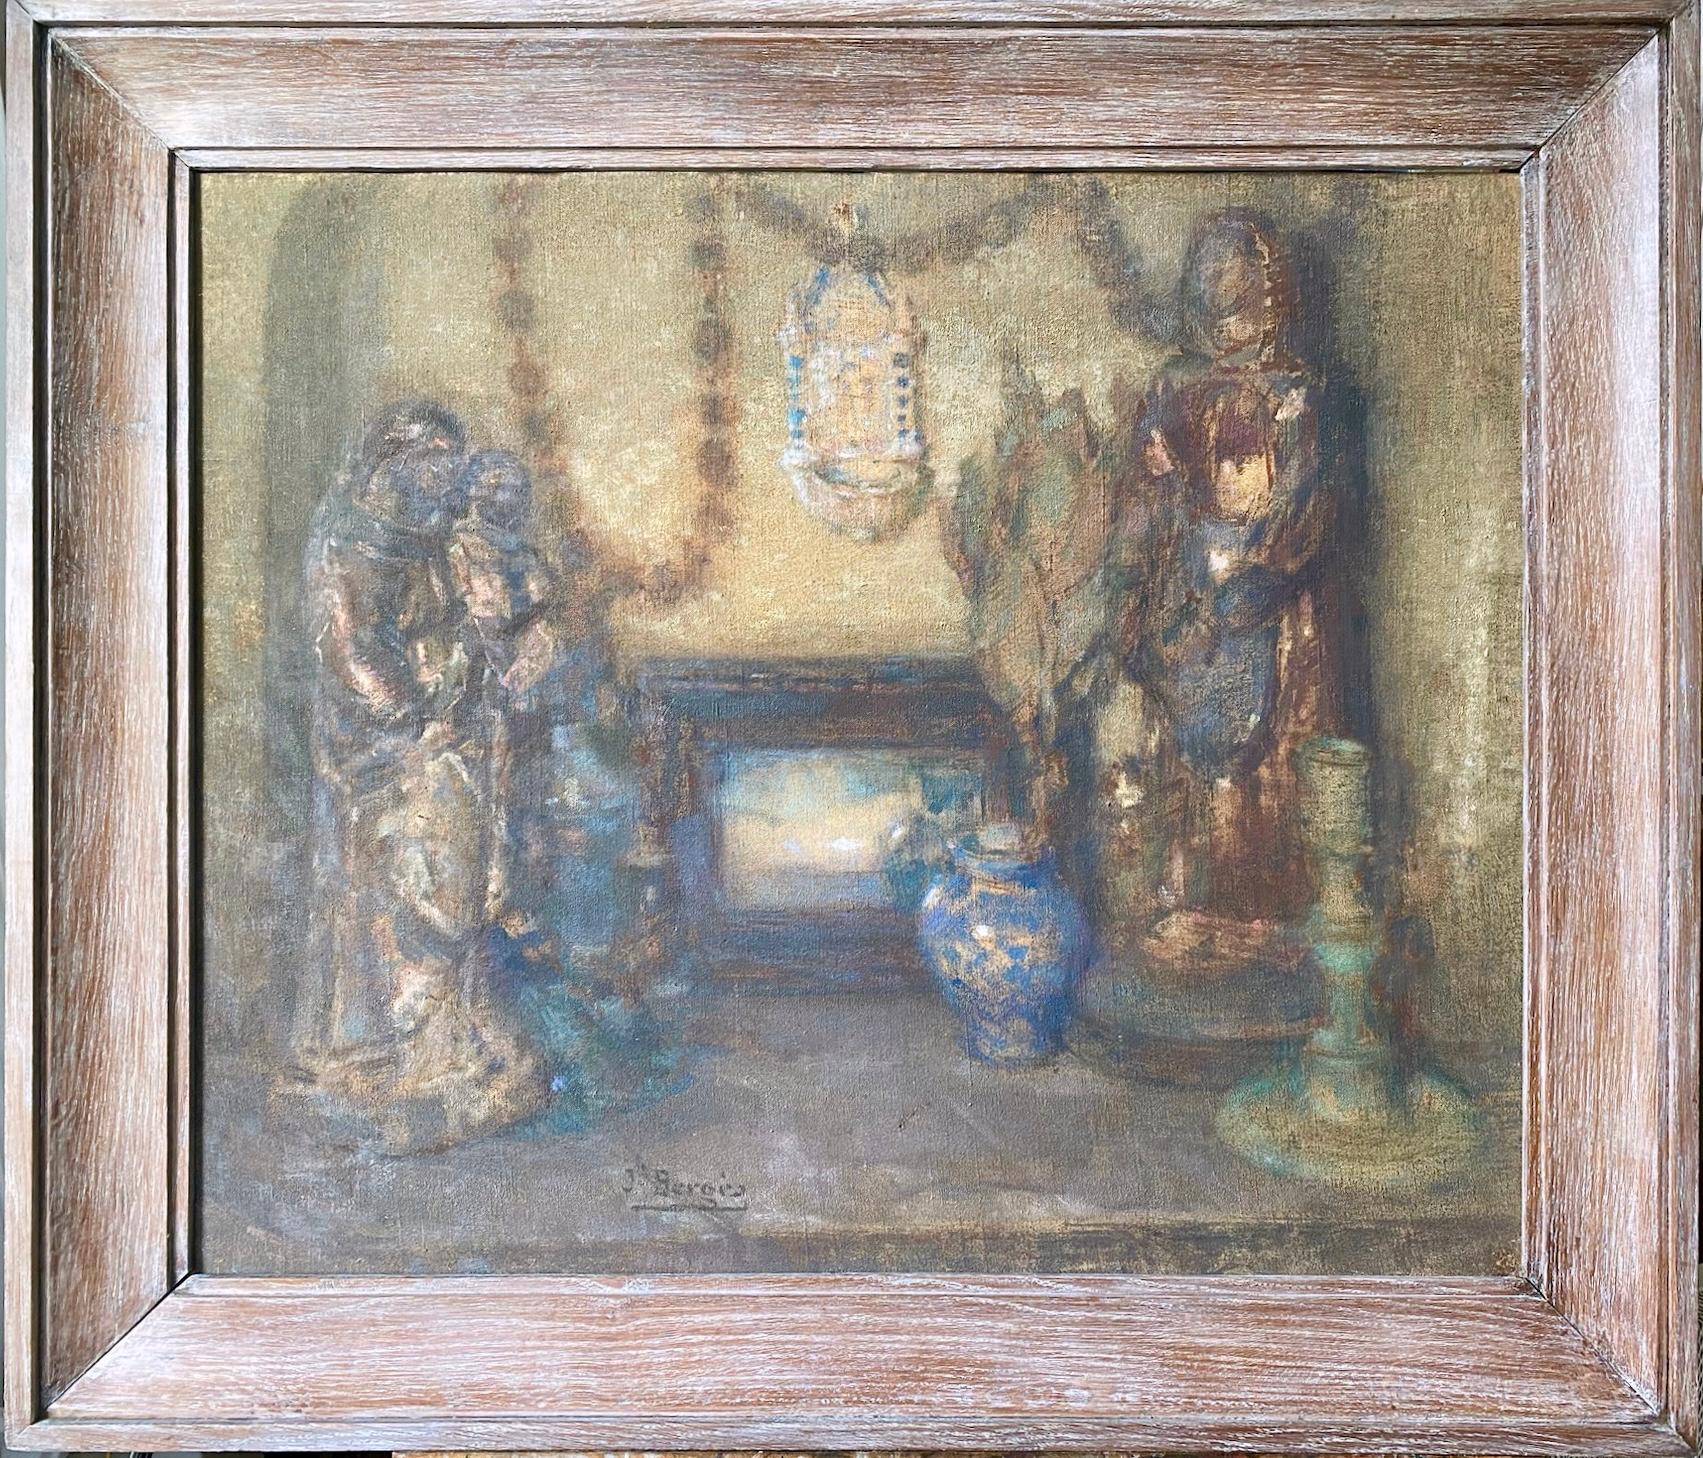 Here is your chance to have your own private chapel with devotional objets and saint figures - in the form of this lovely painting by Joseph Bergès (1878-1956).
Berges was born in the South East of France in the Pyrenees, not far from the Spanish